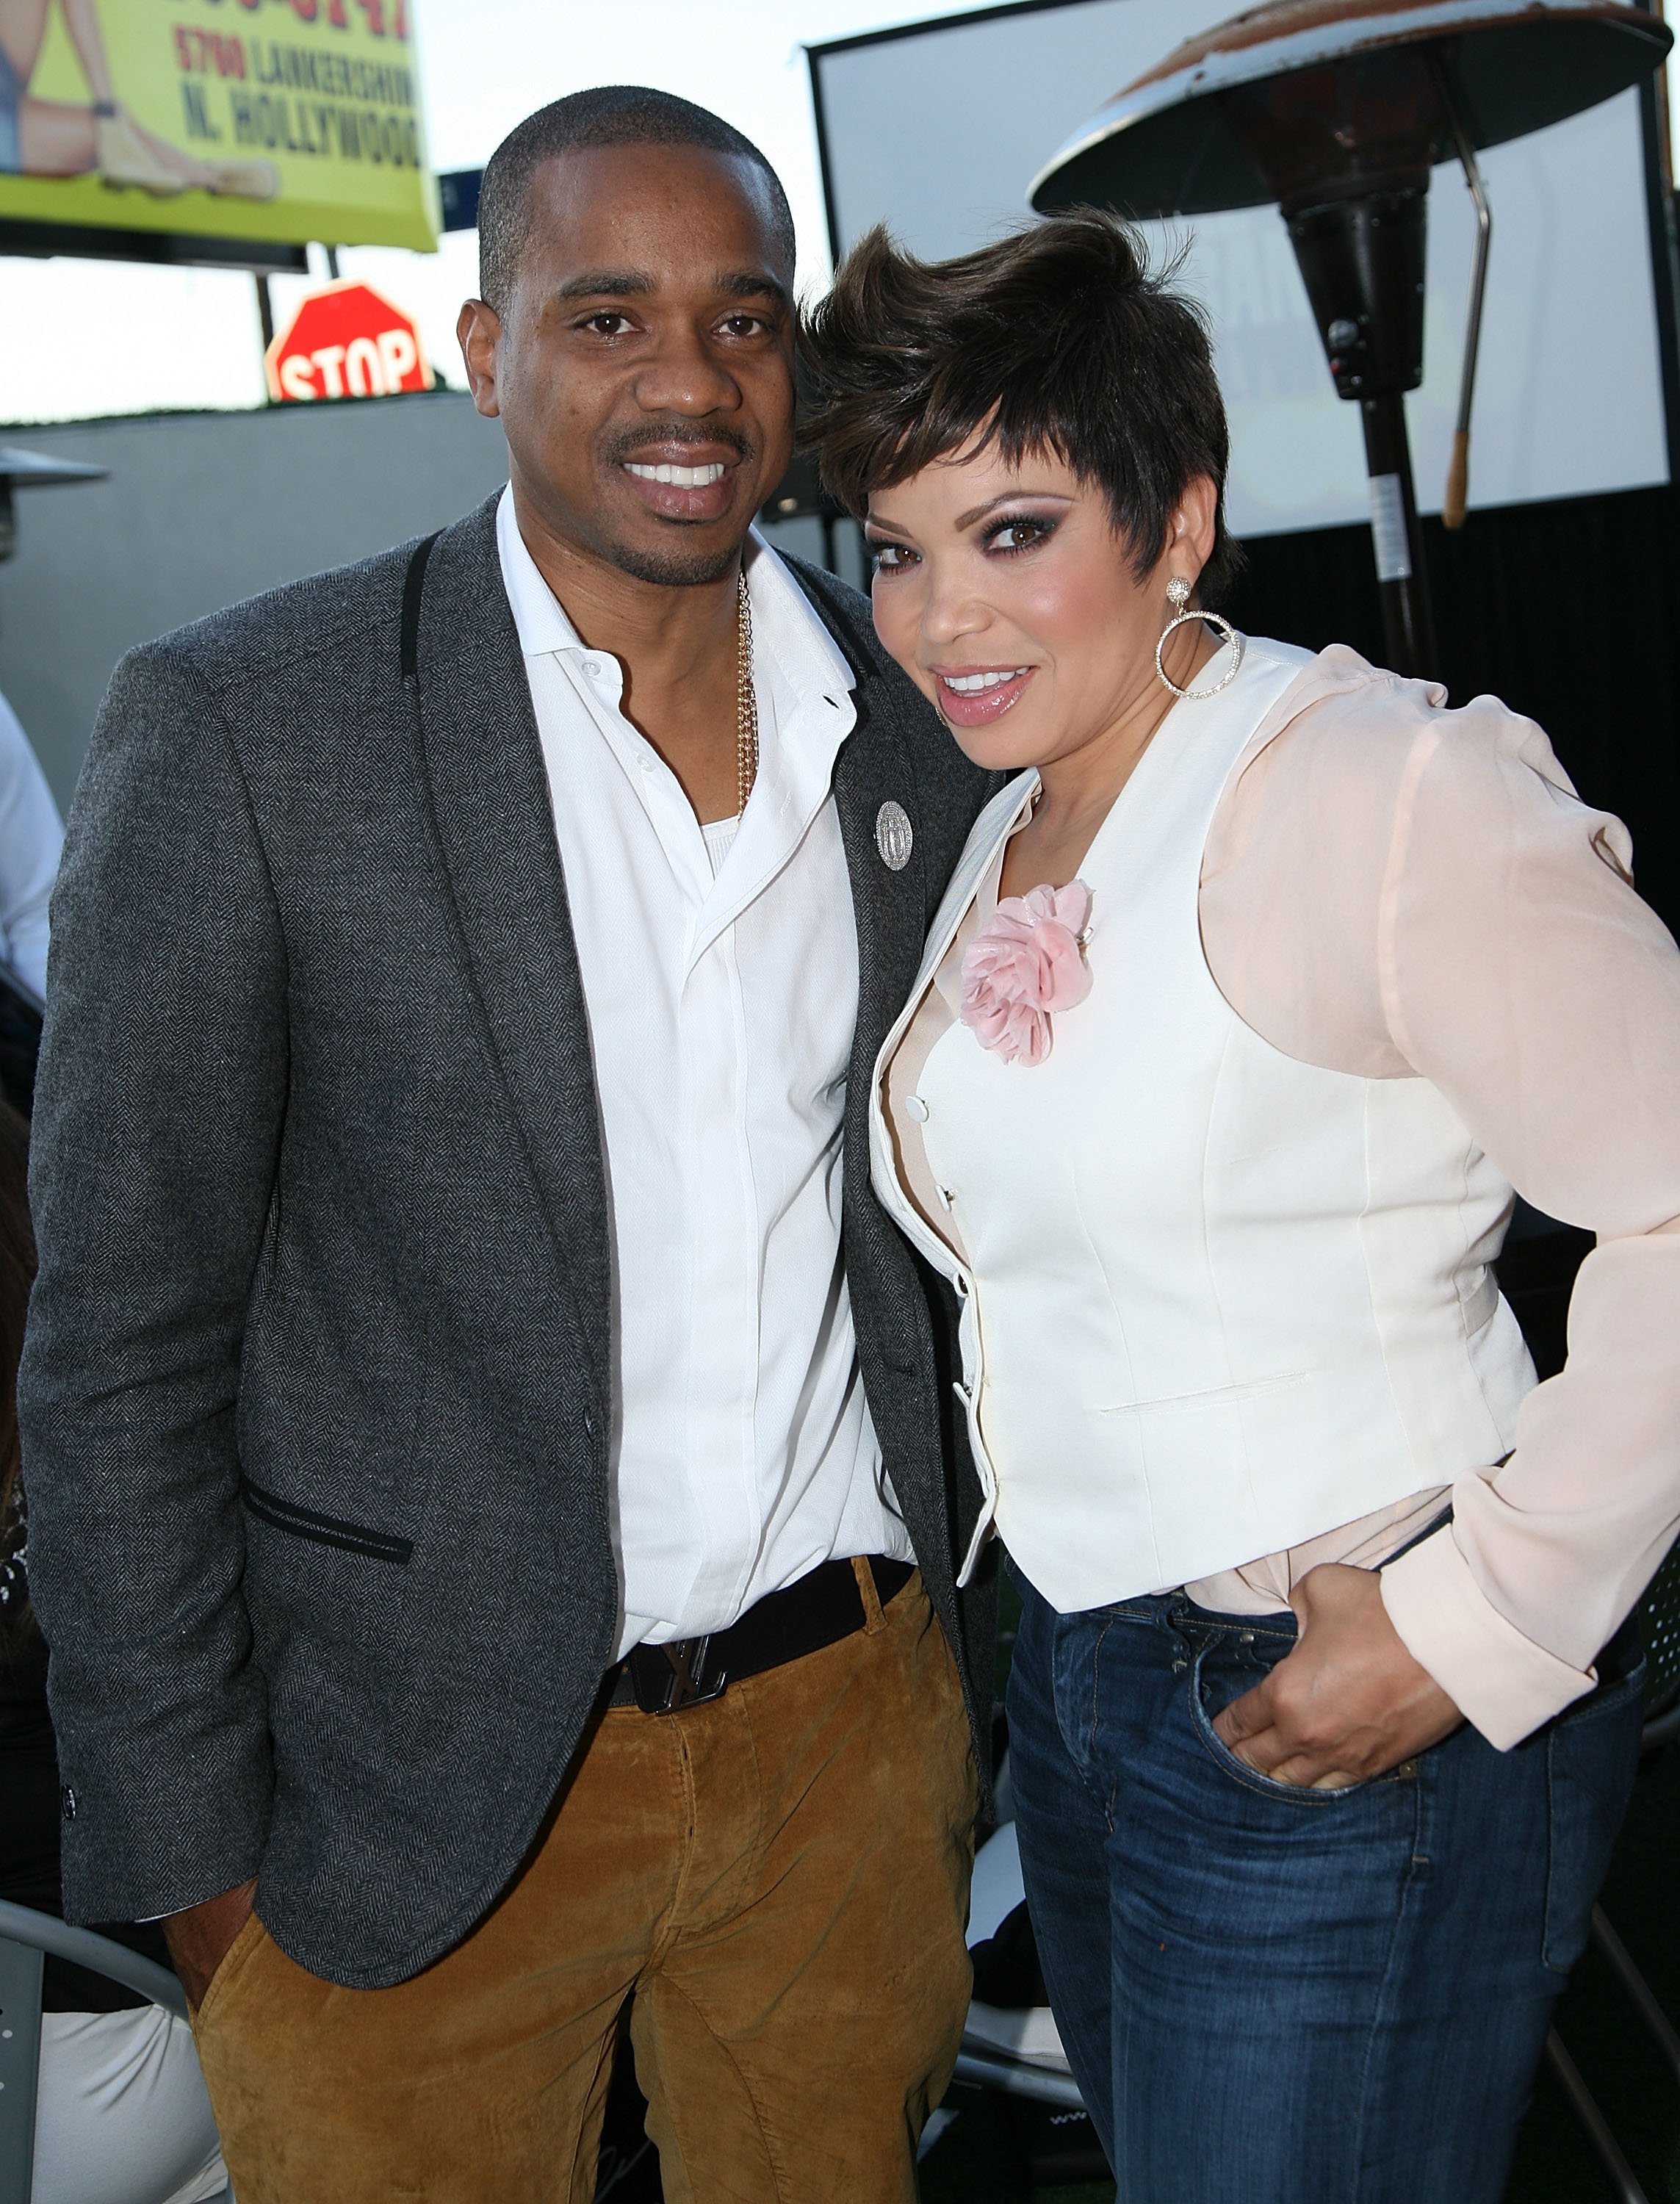 Duane Martin and Tisha Campbell-Martin attending BET's "Real Husbands of Hollywood" Wrap Dinner at Xen Lounge on May 19, 2013 in Los Angeles, California. | Source: Getty